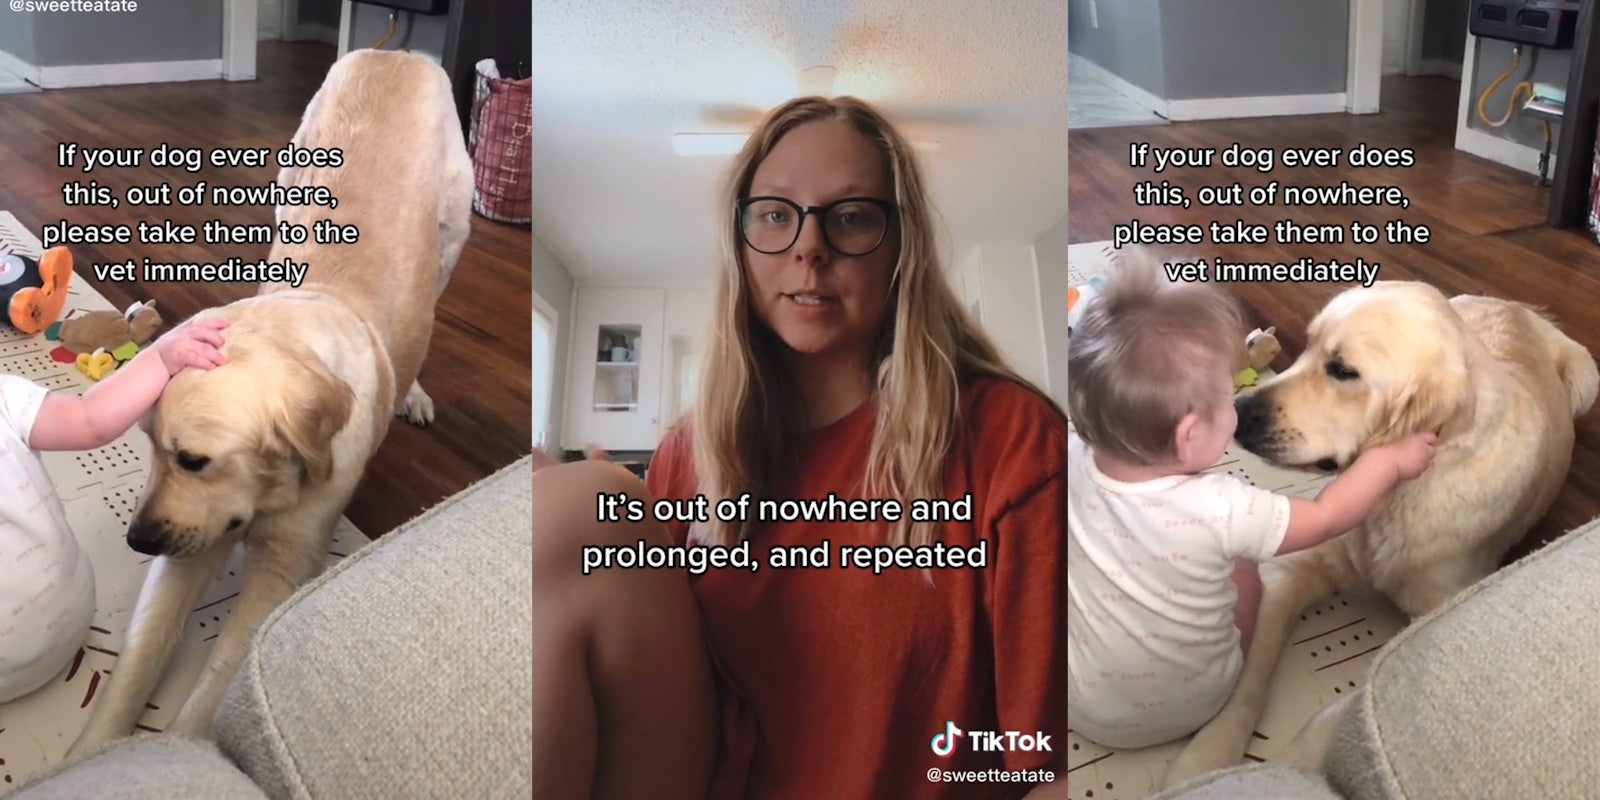 baby with dog stretching and caption 'if your dog ever does this, out of nowhere, please take them to the vet immediately' (l&r) woman with caption 'it's out of nowhere and prolonged, and repeated' (c)